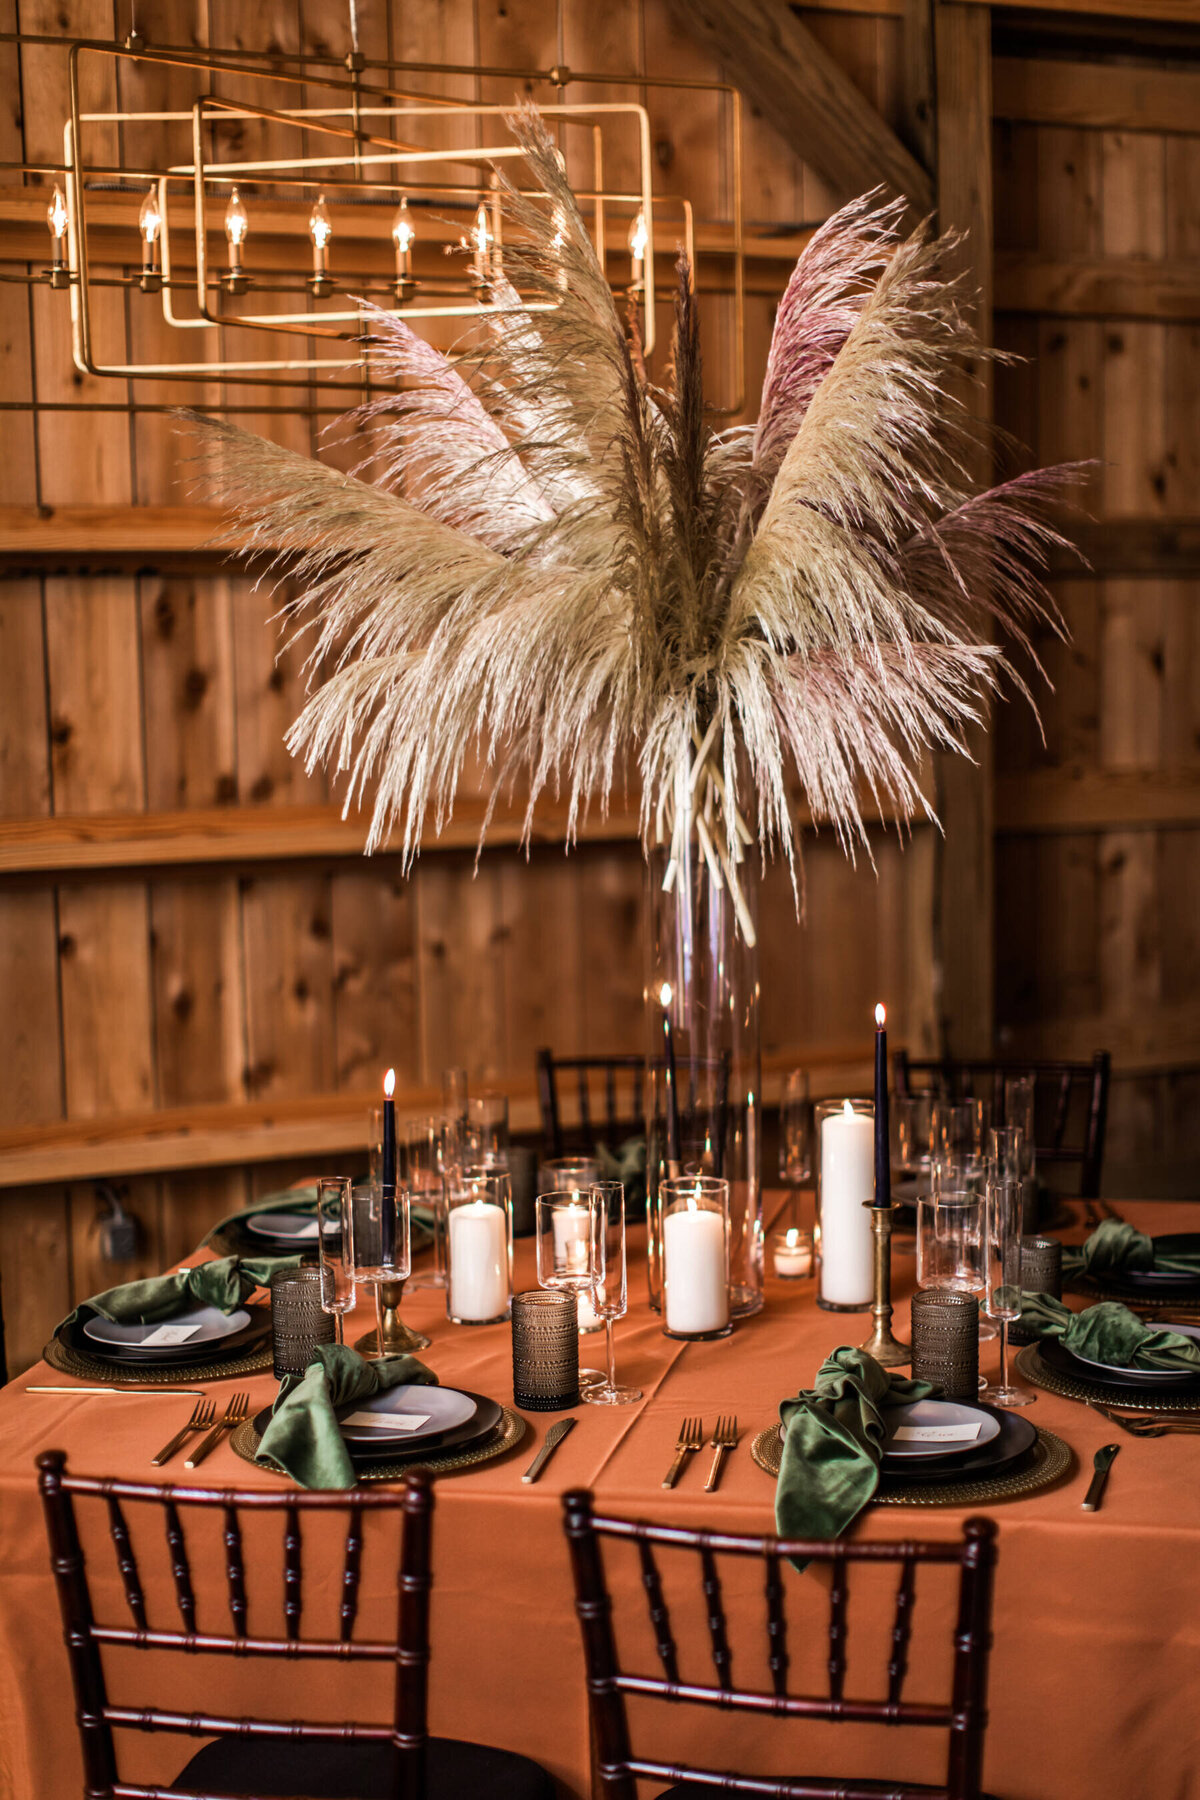 Large pampas arrangement surrounded by candles on cooper colored table cloth